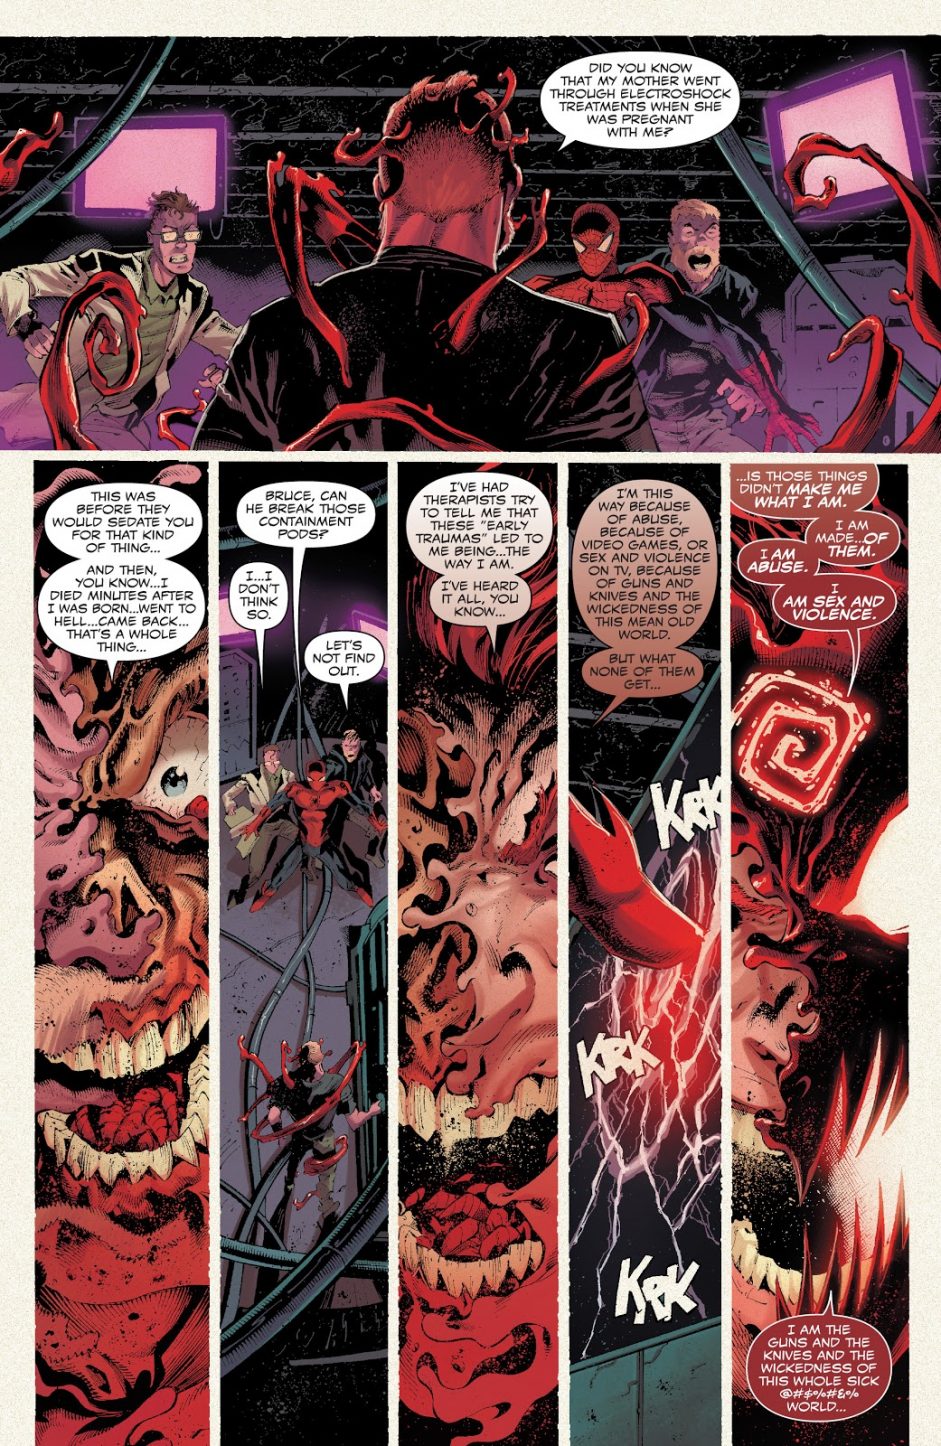 Carnage (Absolute Carnage #3)